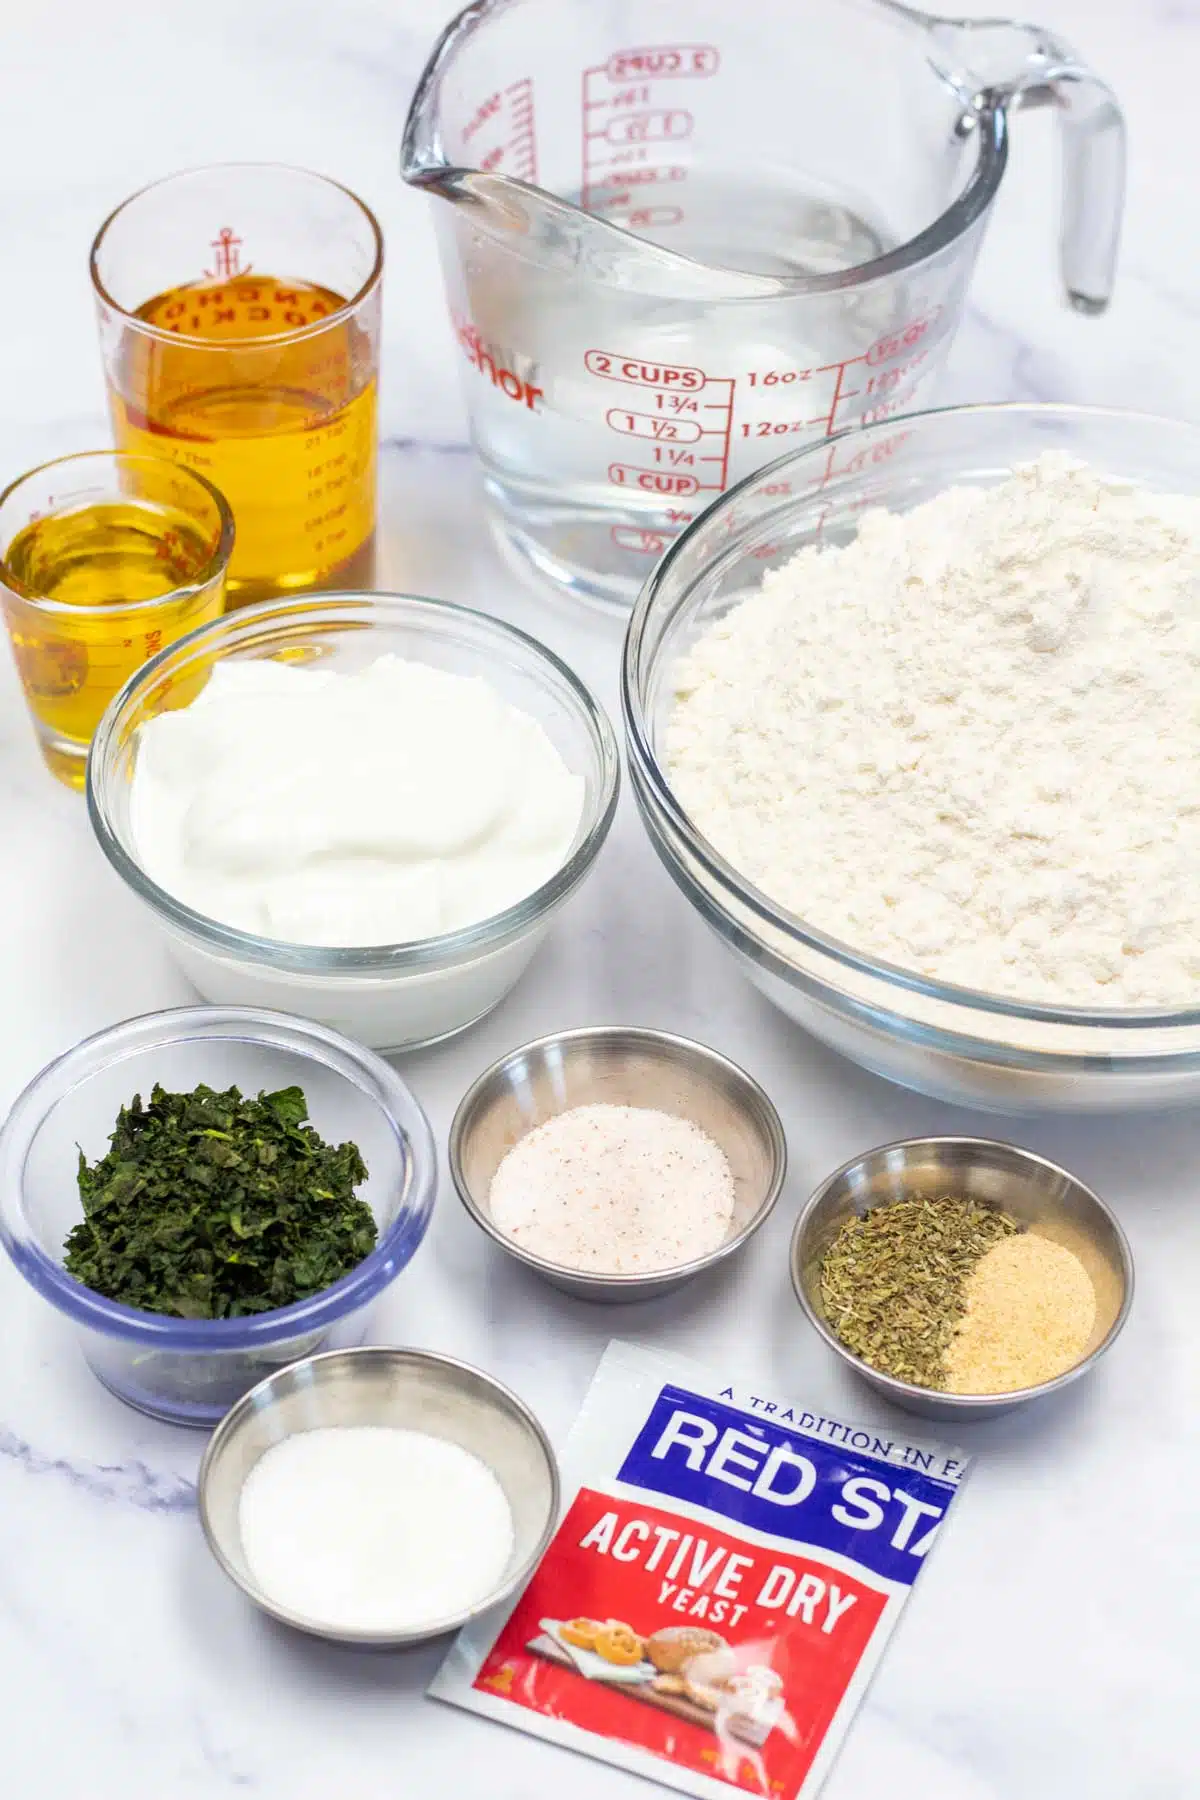 Tall image showing homemade flatbread ingredients.